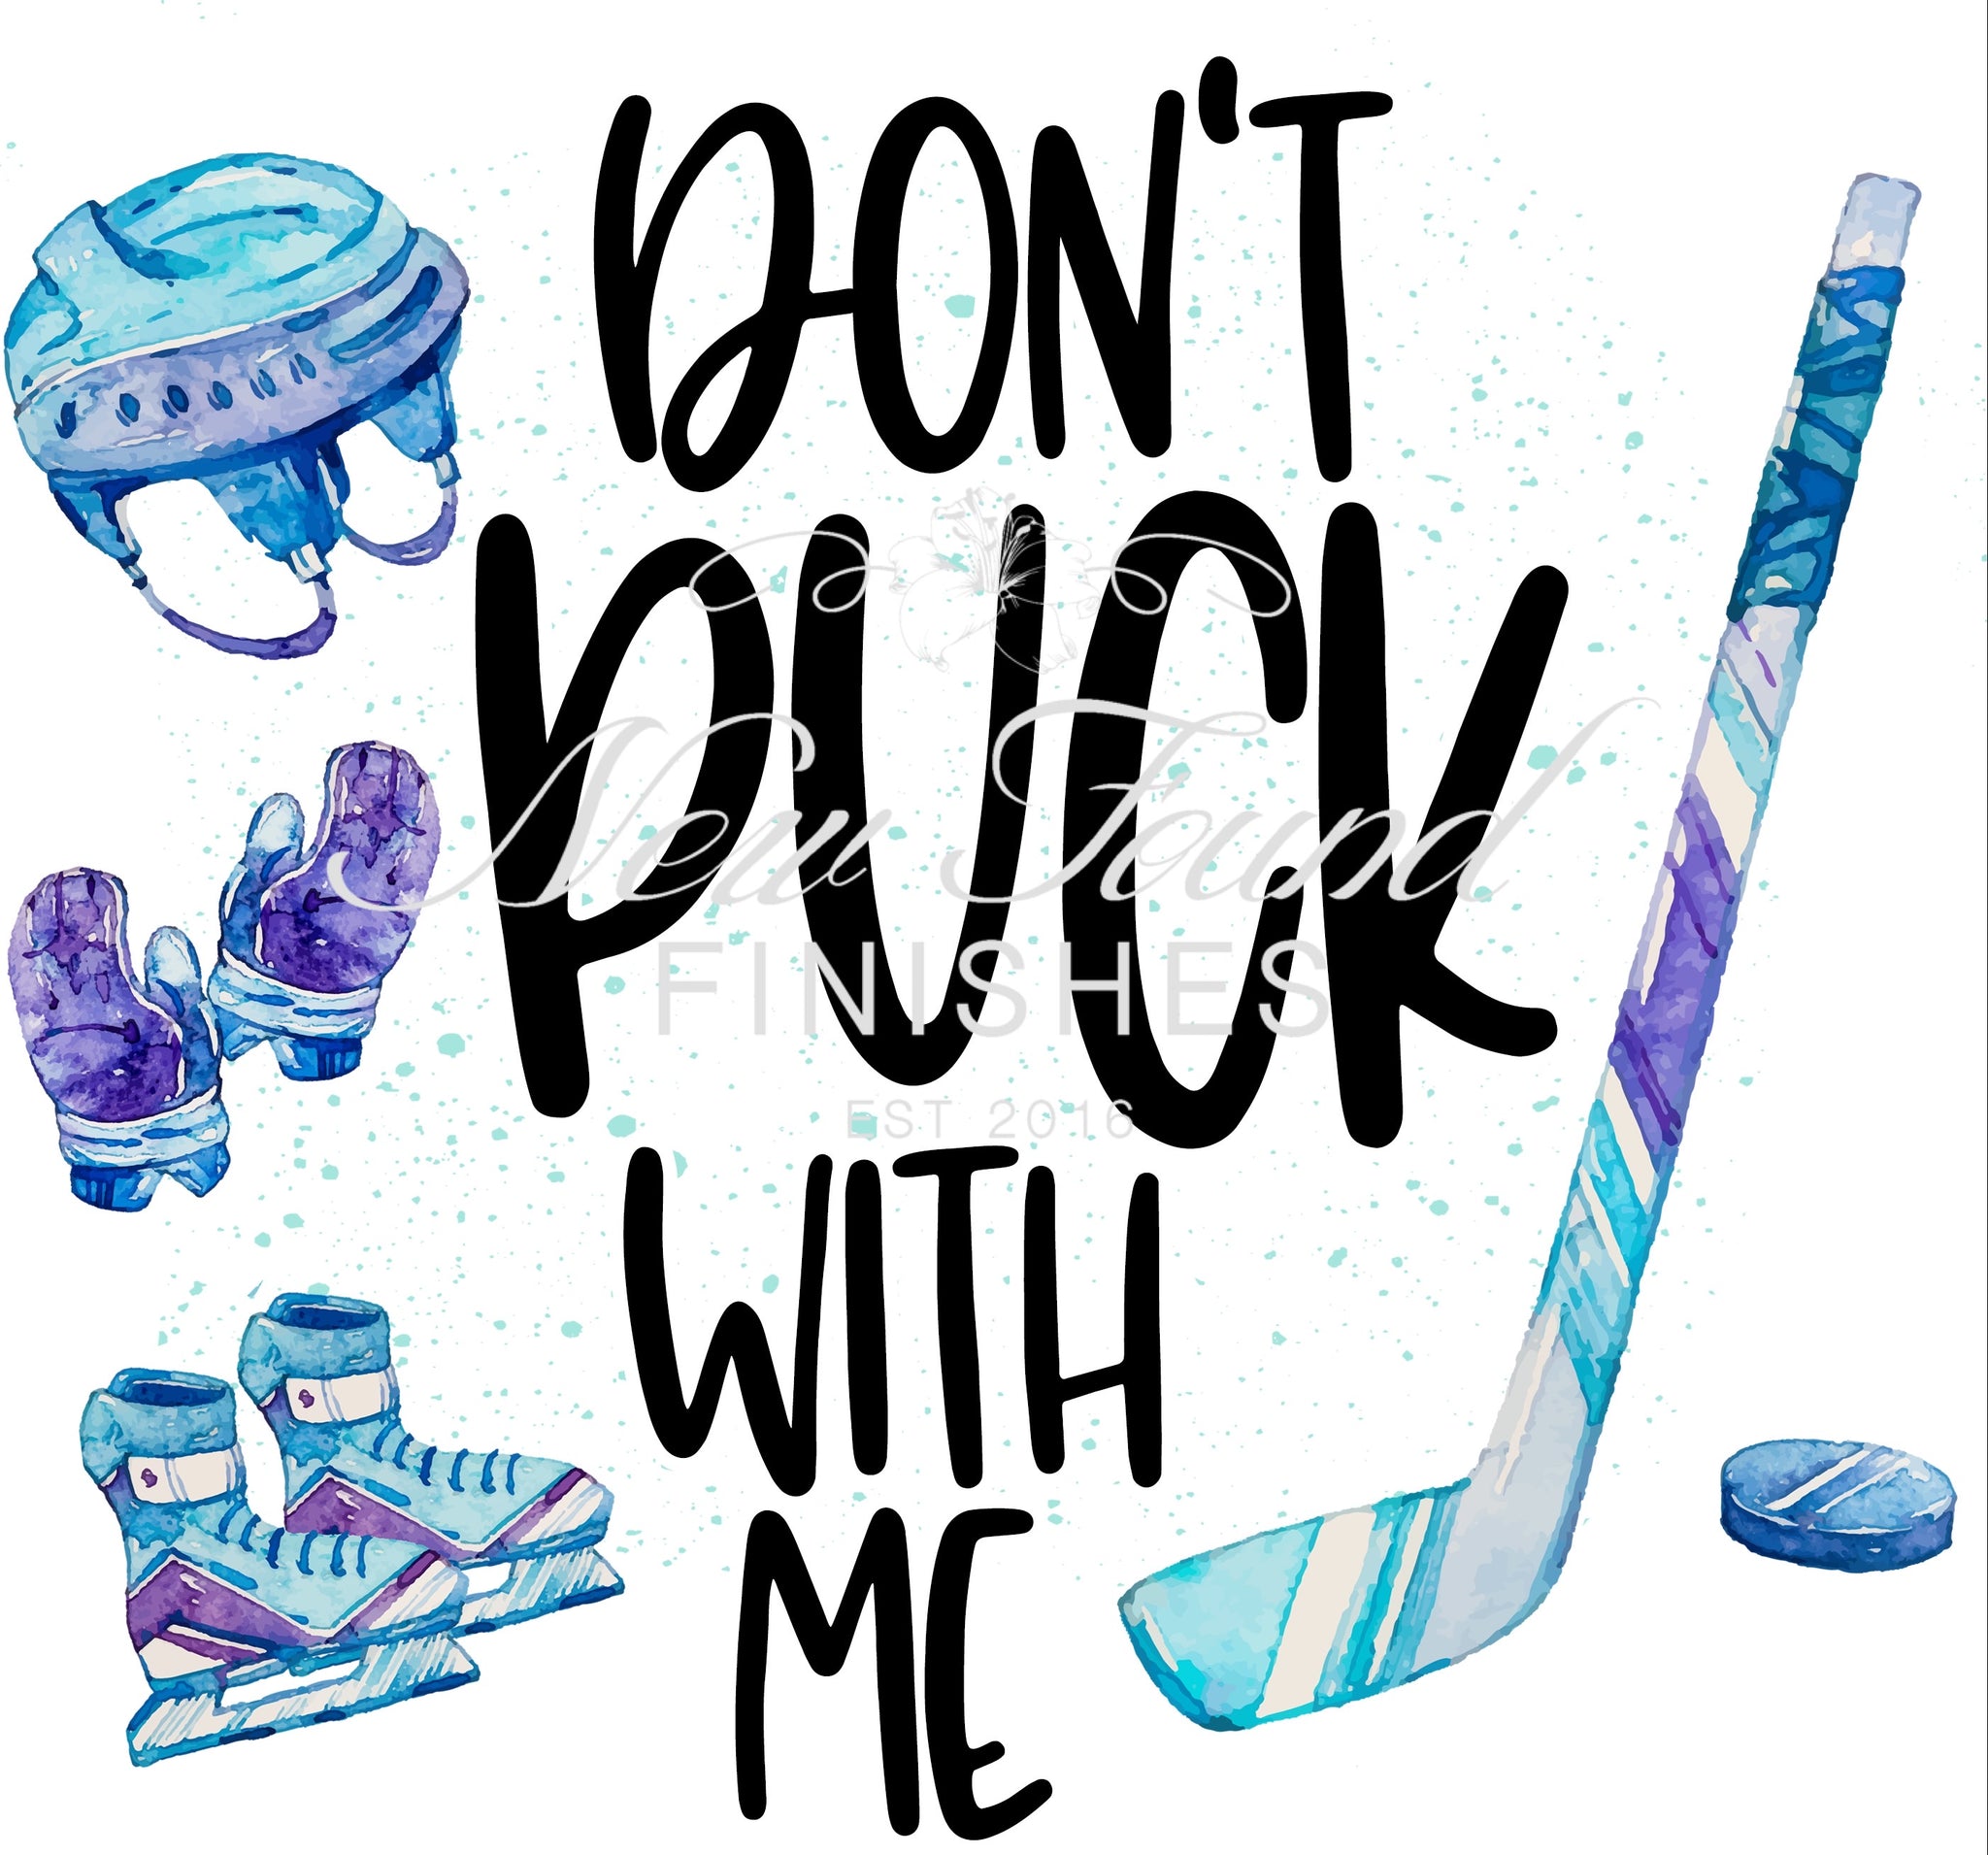 Don’t puck with me